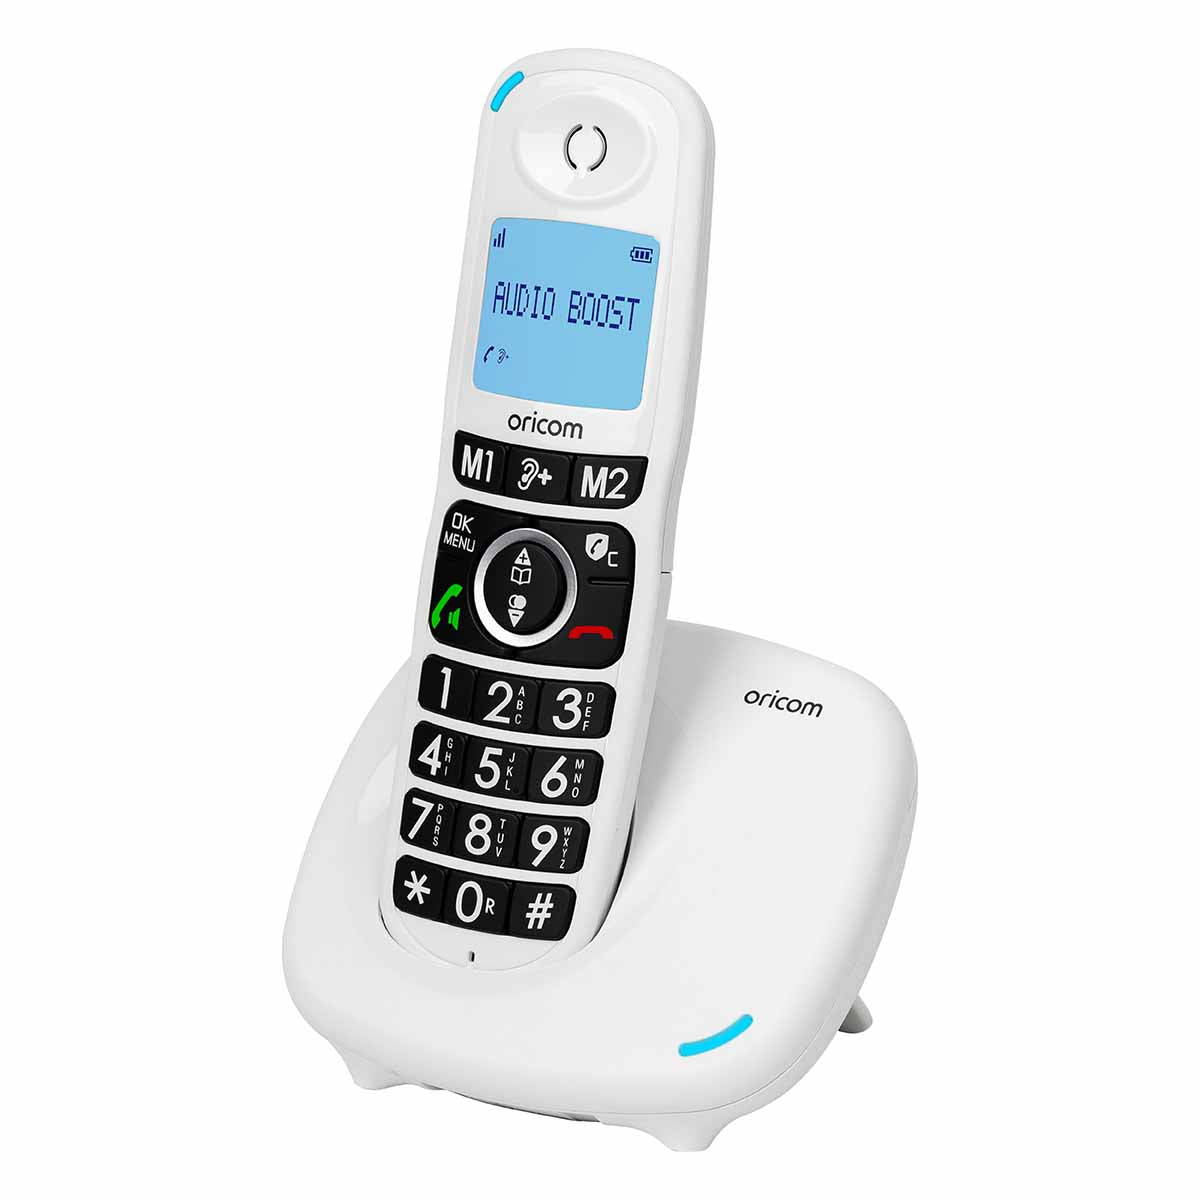 CARE620 DECT Cordless Amplified Phone with Instant Call Blocking